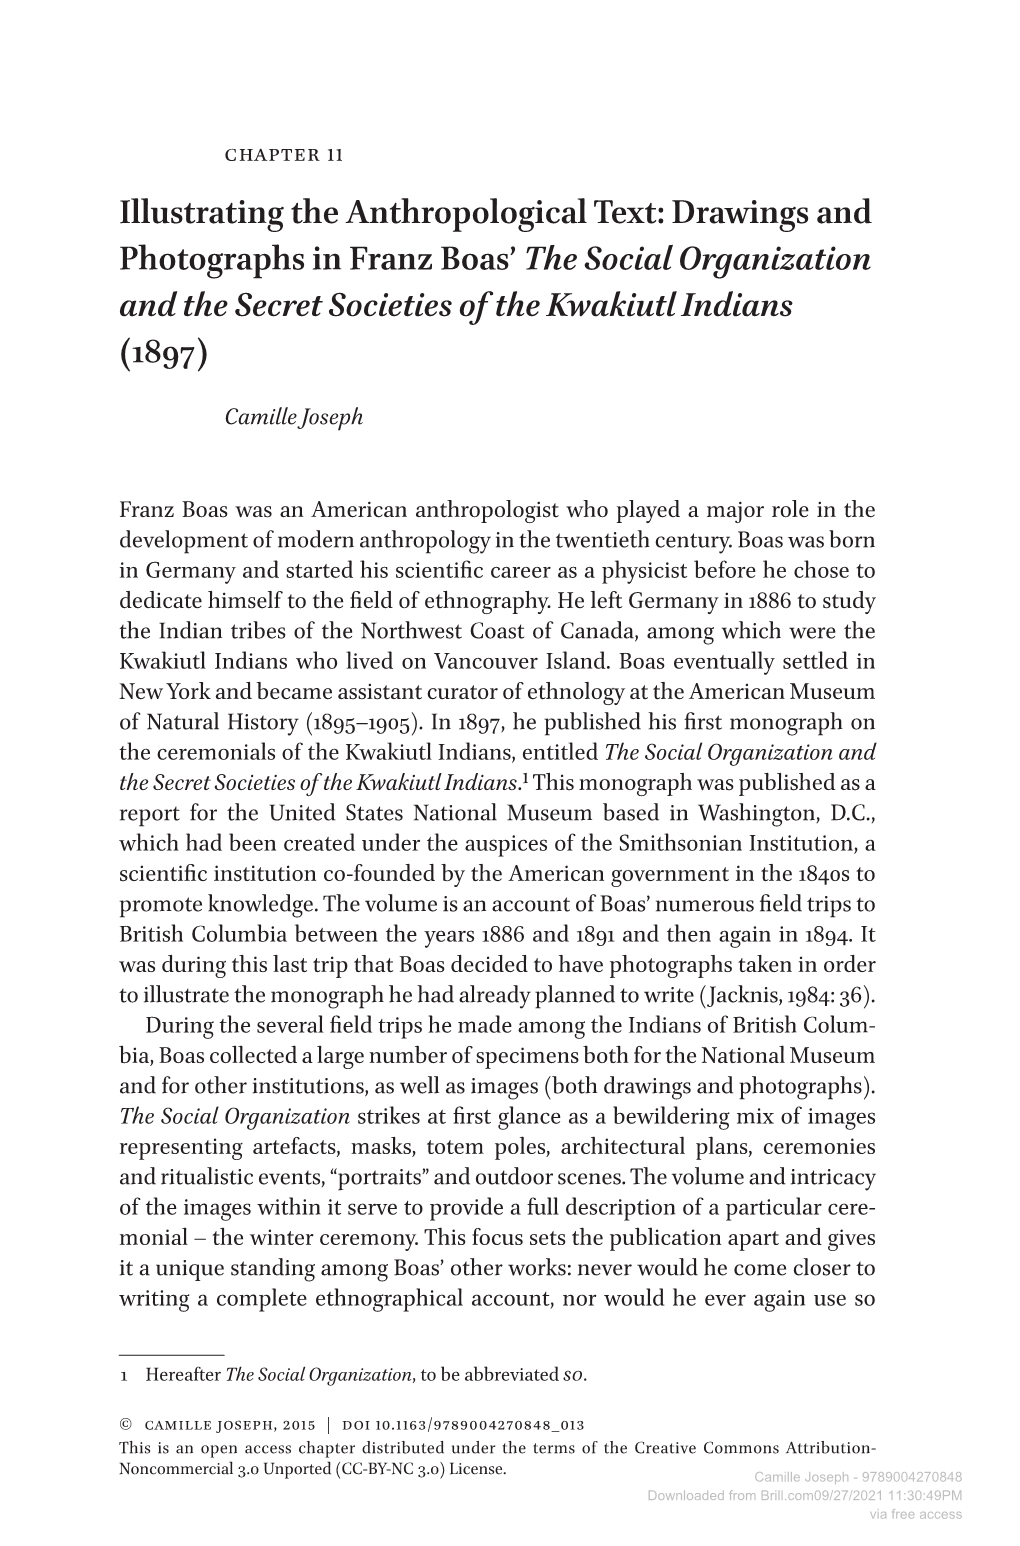 Illustrating the Anthropological Text: Drawings and Photographs in Franz Boas’ the Social Organization and the Secret Societies of the Kwakiutl Indians (1897)